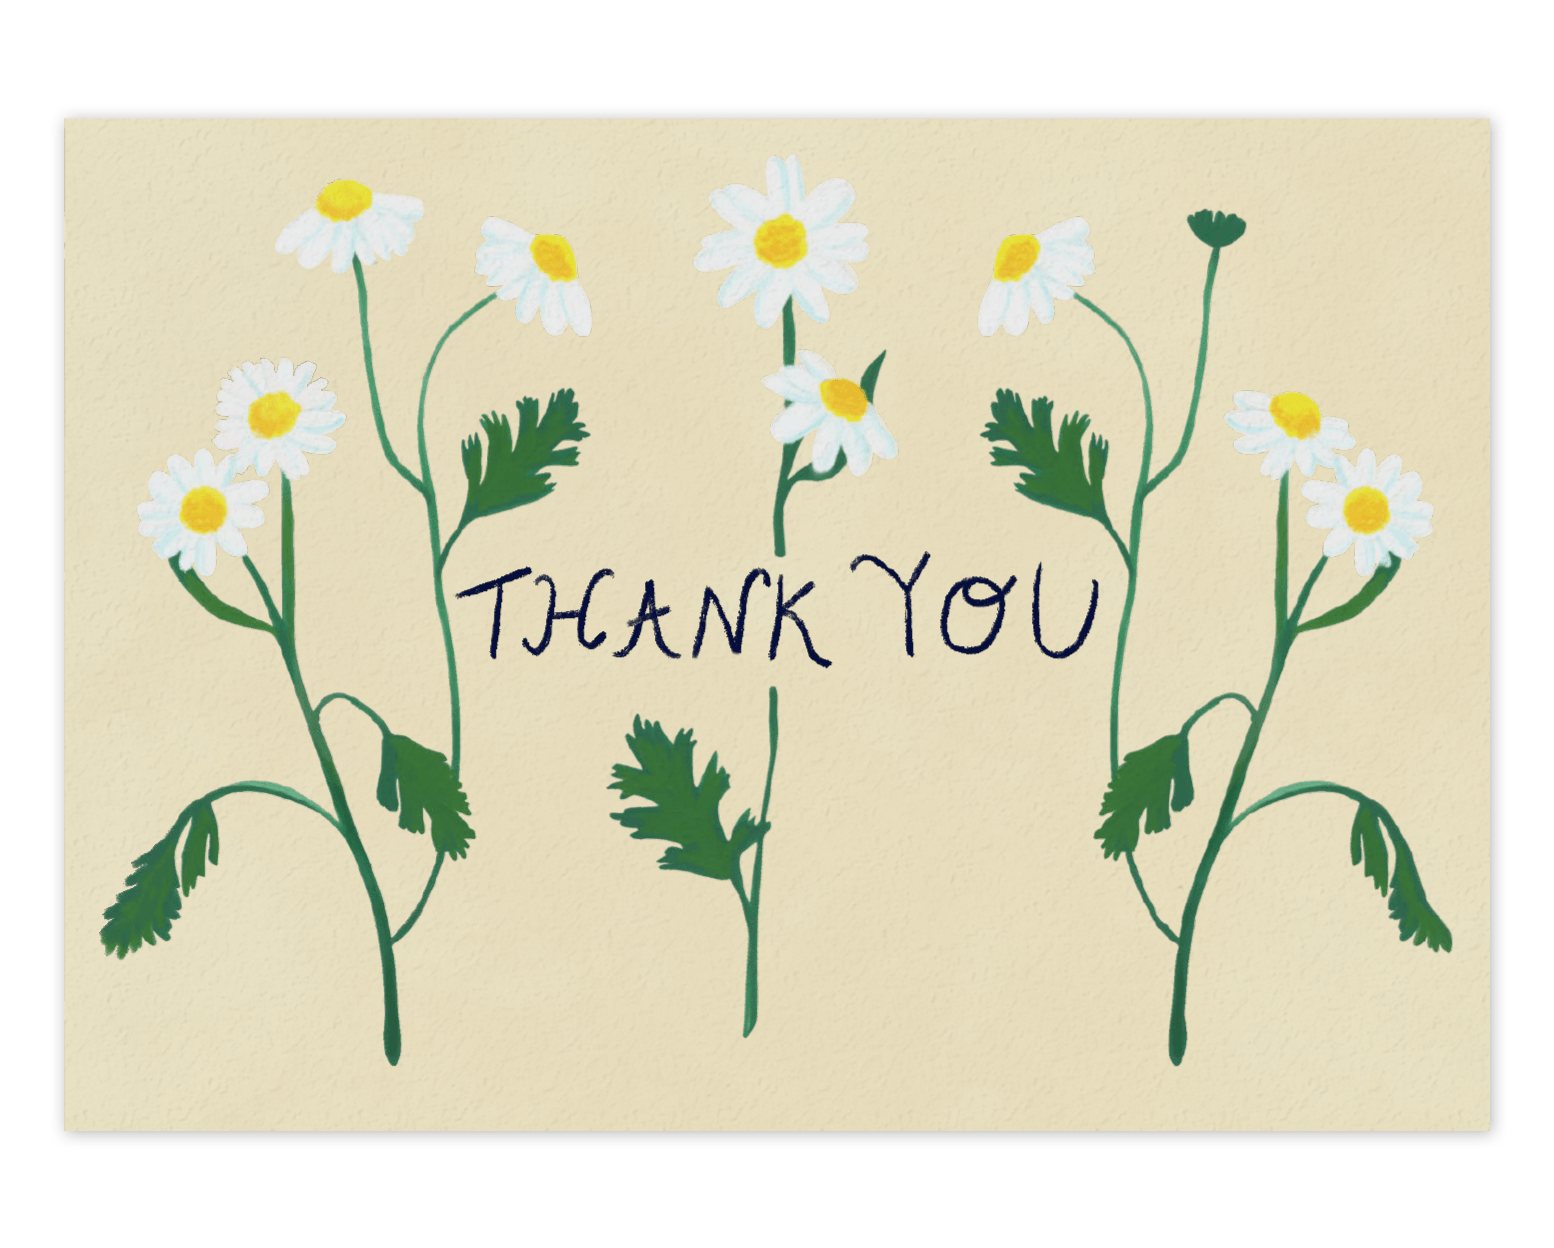  Three stems of lively white forest flowers cover the card nearly top to bottom horizontally, with the words &quot;Thank You&quot; going through the center of them in black ink. This design is printed on a cream colored background. 